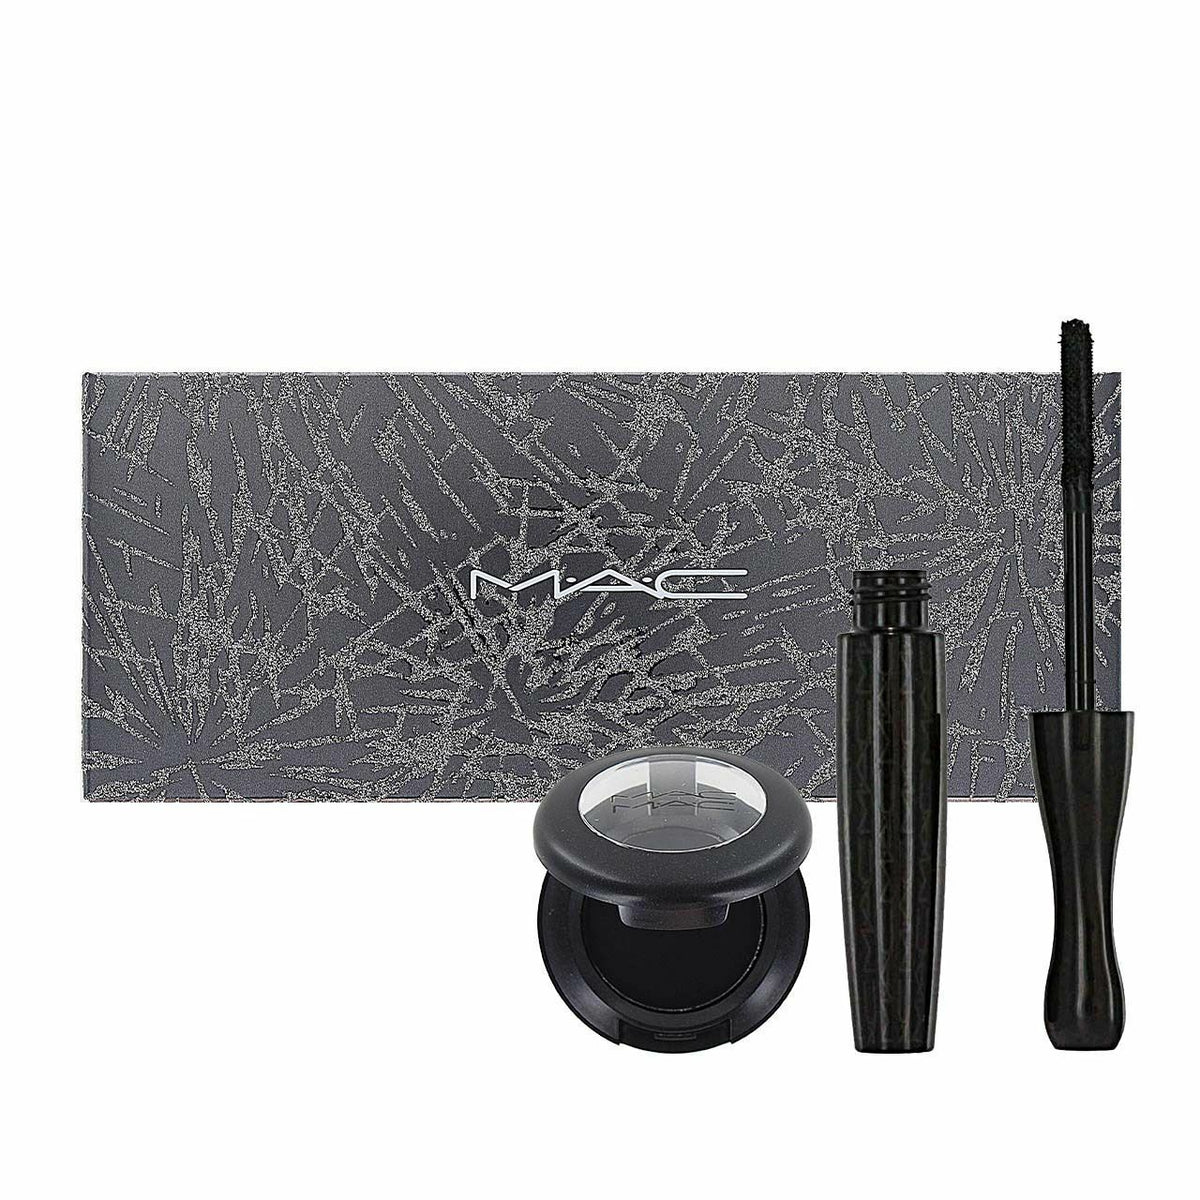 Mac Spark of Magic Duo Eyeshadow & Extreme 3D Mascara - AllurebeautypkMac Spark of Magic Duo Eyeshadow & Extreme 3D Mascara